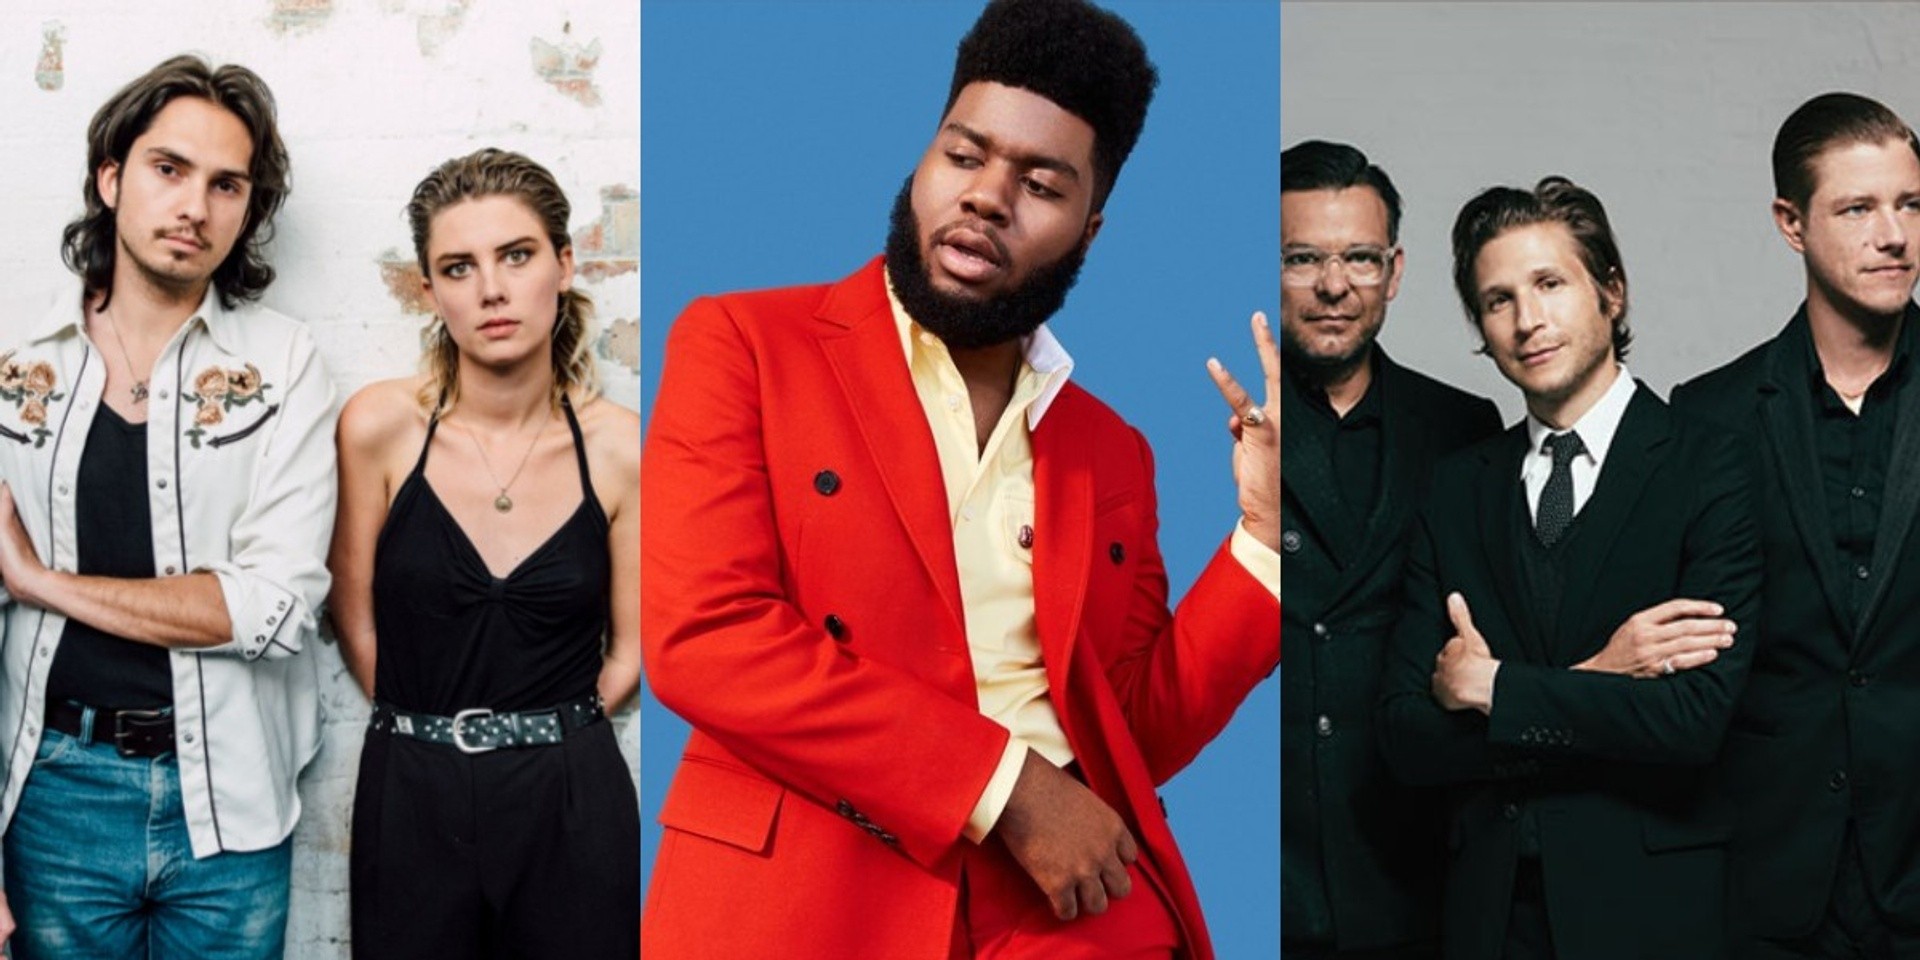 Clockenflap 2018 line-up revealed – Khalid, Interpol, Wolf Alice and more confirmed 